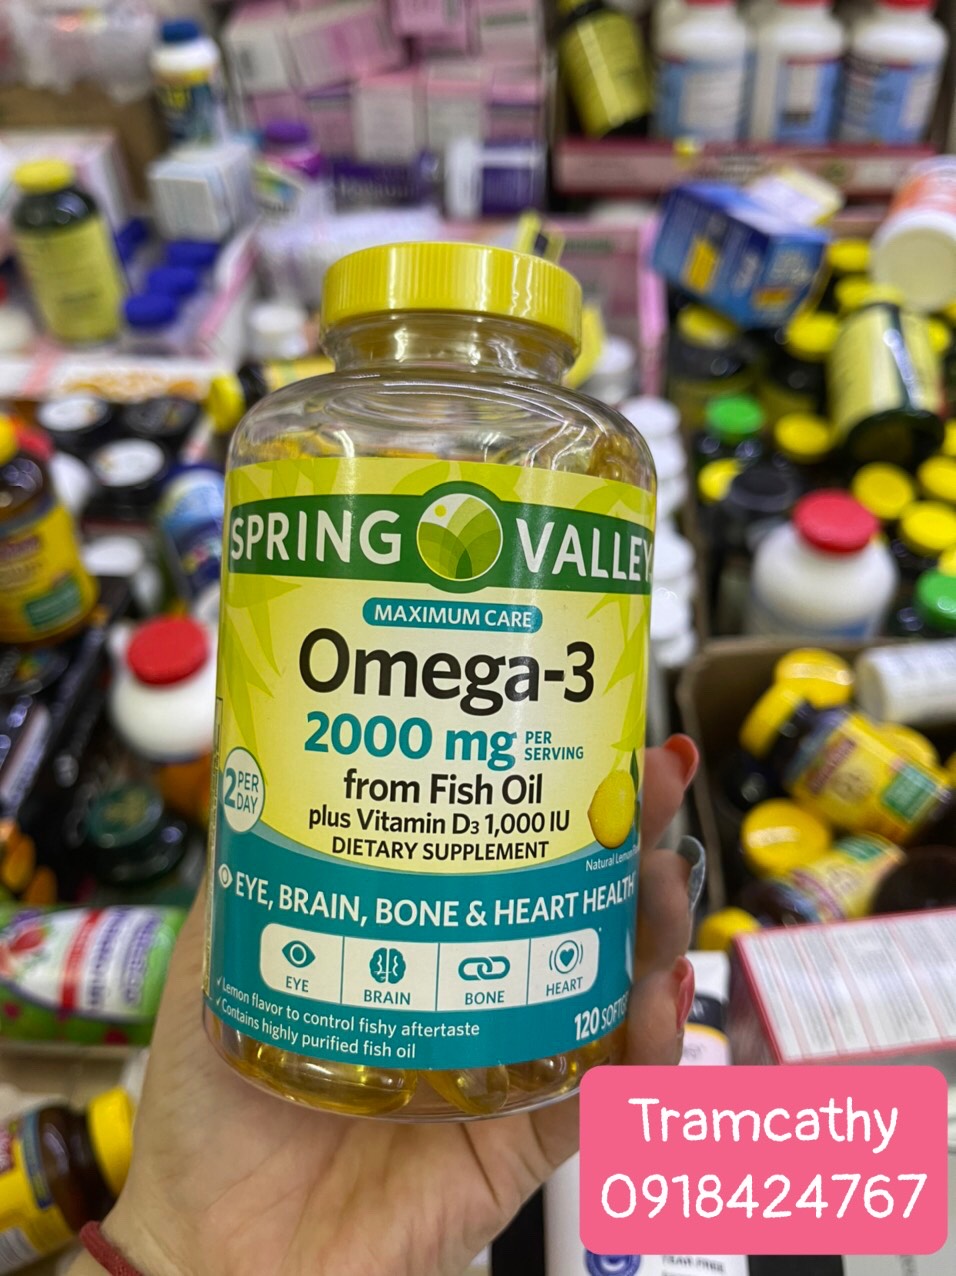 Omega 3 Fish Oil Spring Valley 2000mg